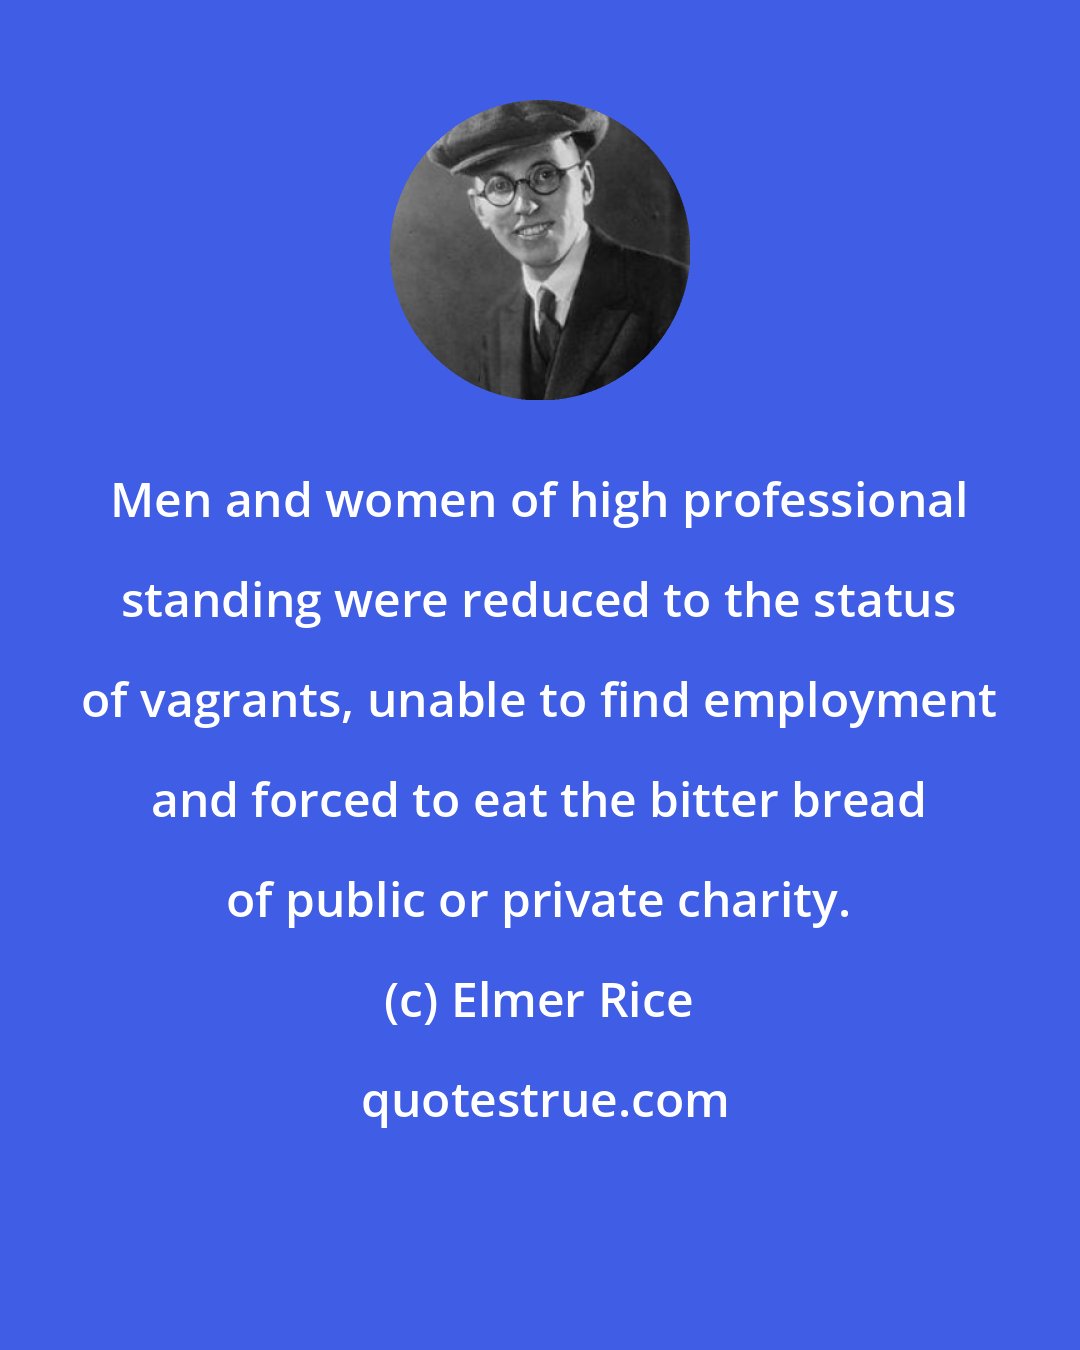 Elmer Rice: Men and women of high professional standing were reduced to the status of vagrants, unable to find employment and forced to eat the bitter bread of public or private charity.